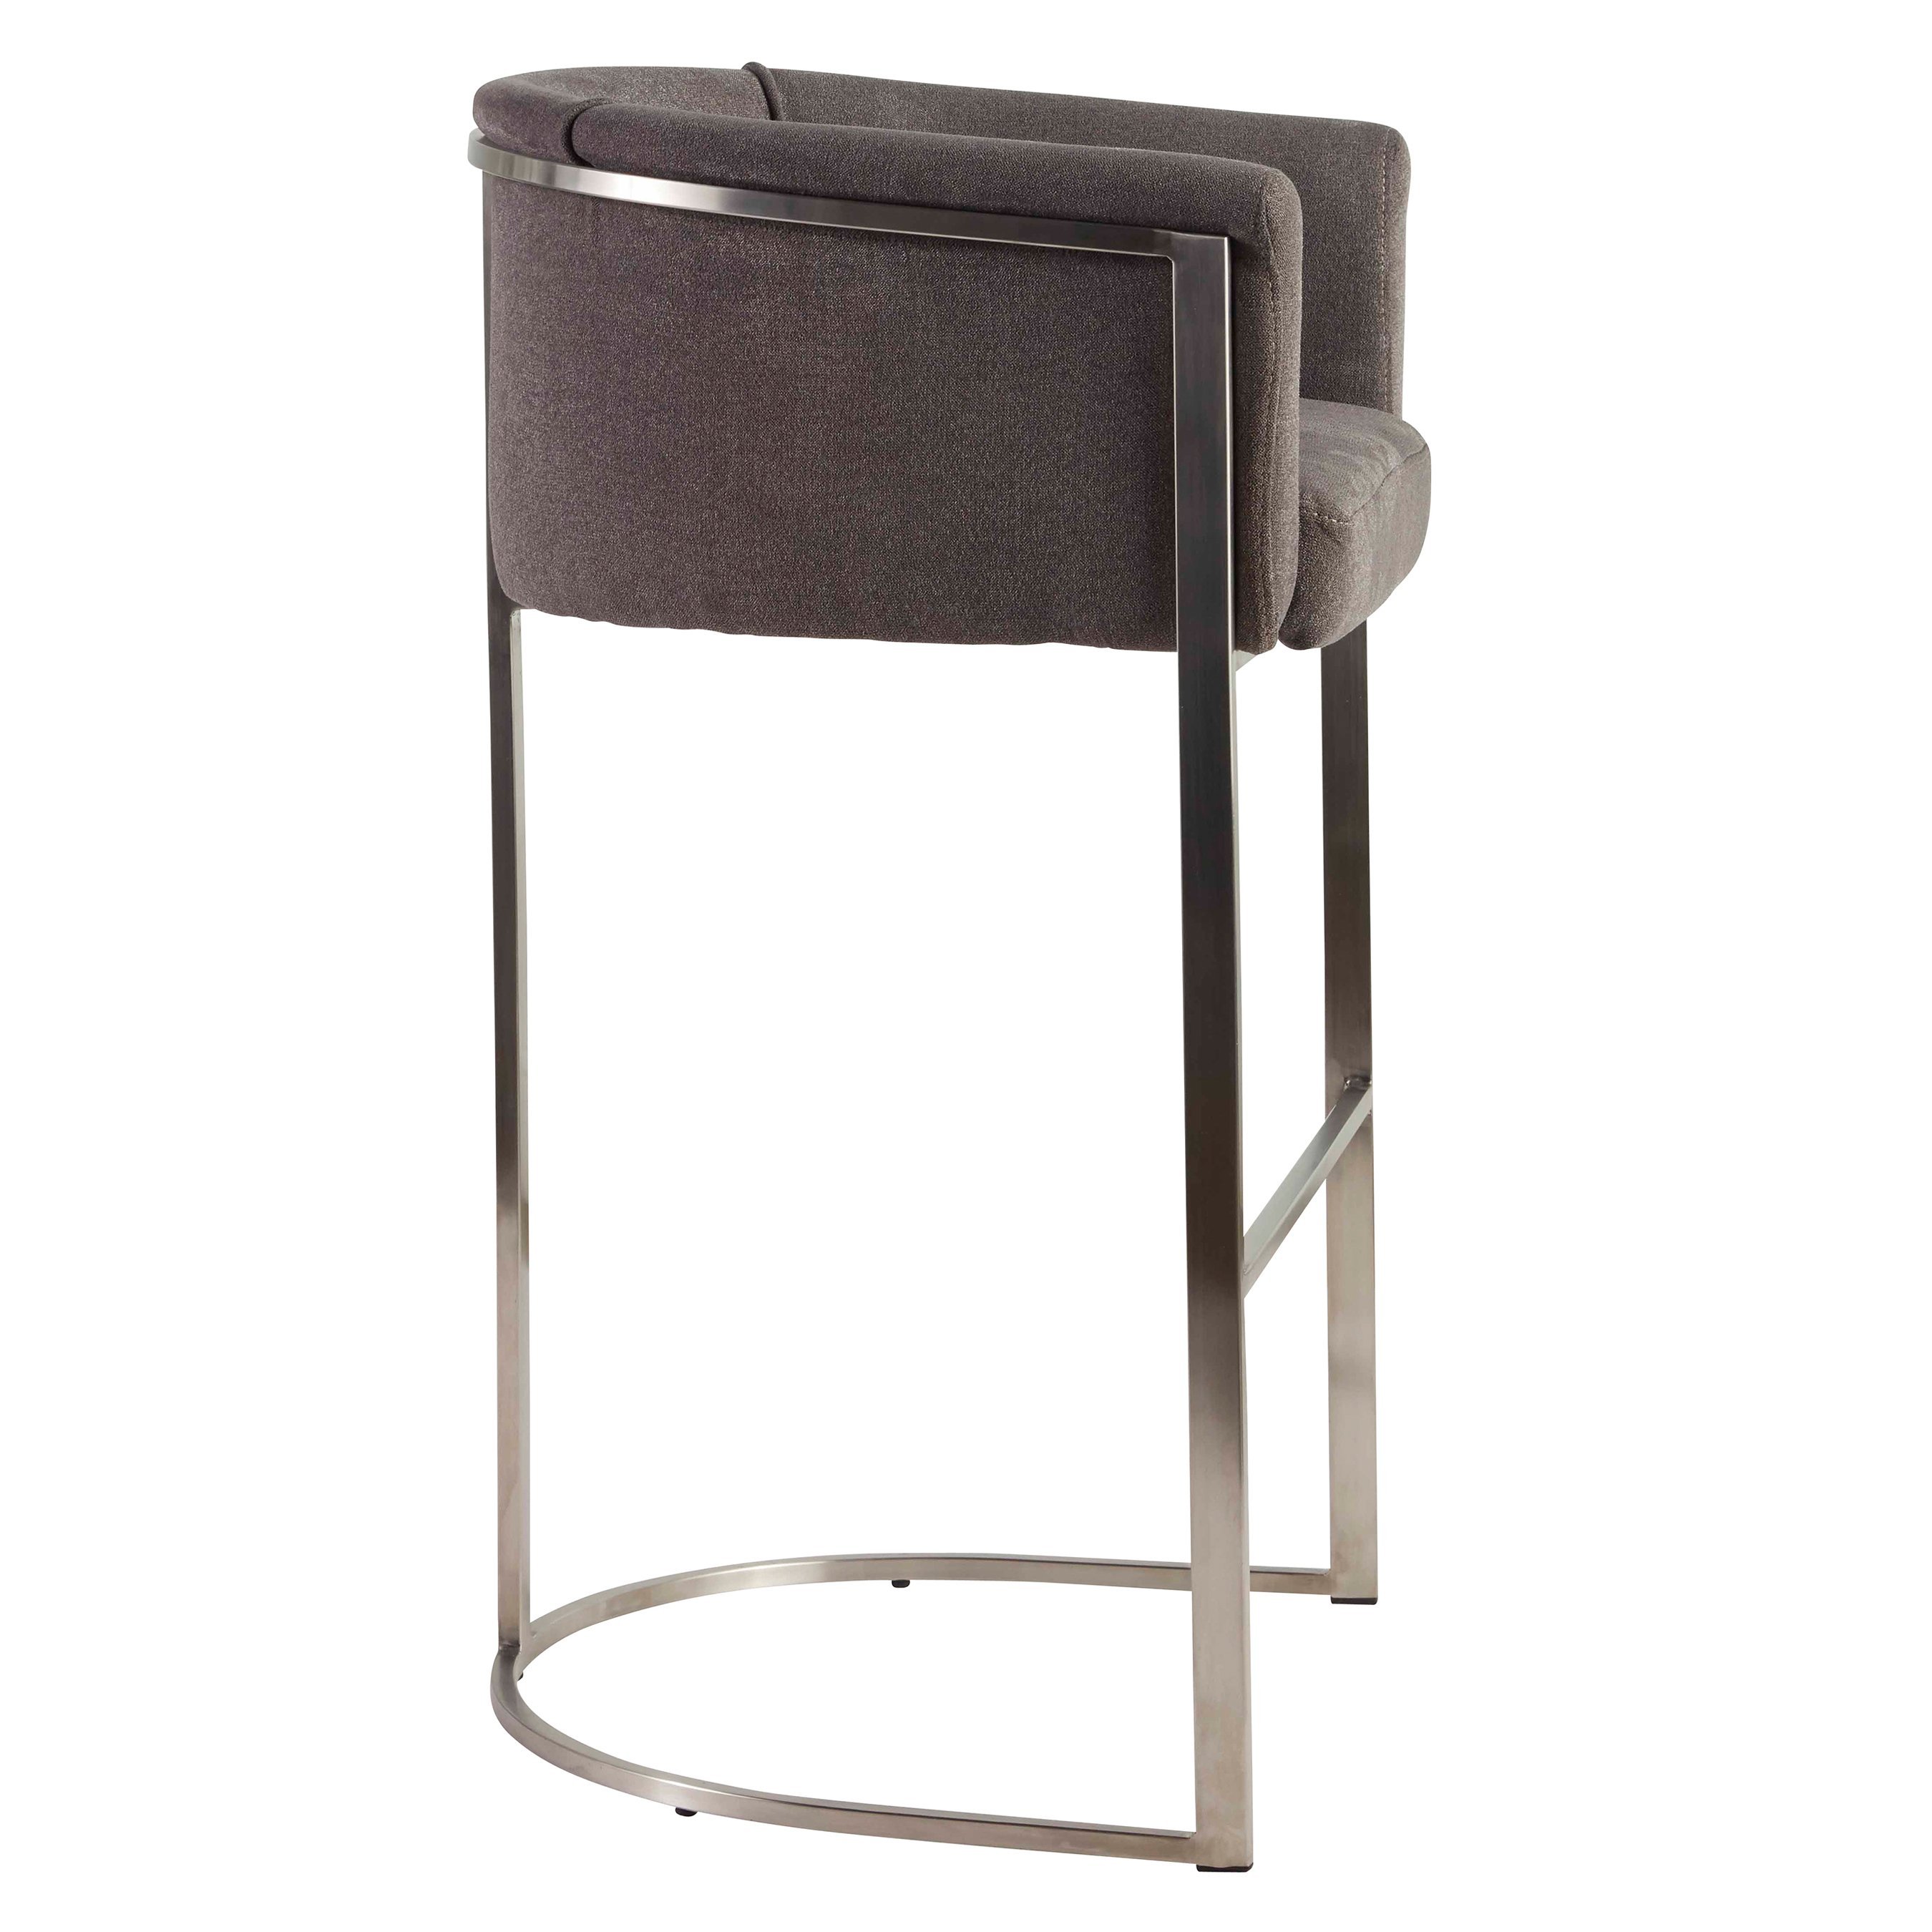 clarissa bar stool desert grey dark metal accent table will fit red round side leather drum bamboo nest tables office furniture wooden legs sage coffee placemat set styling mid